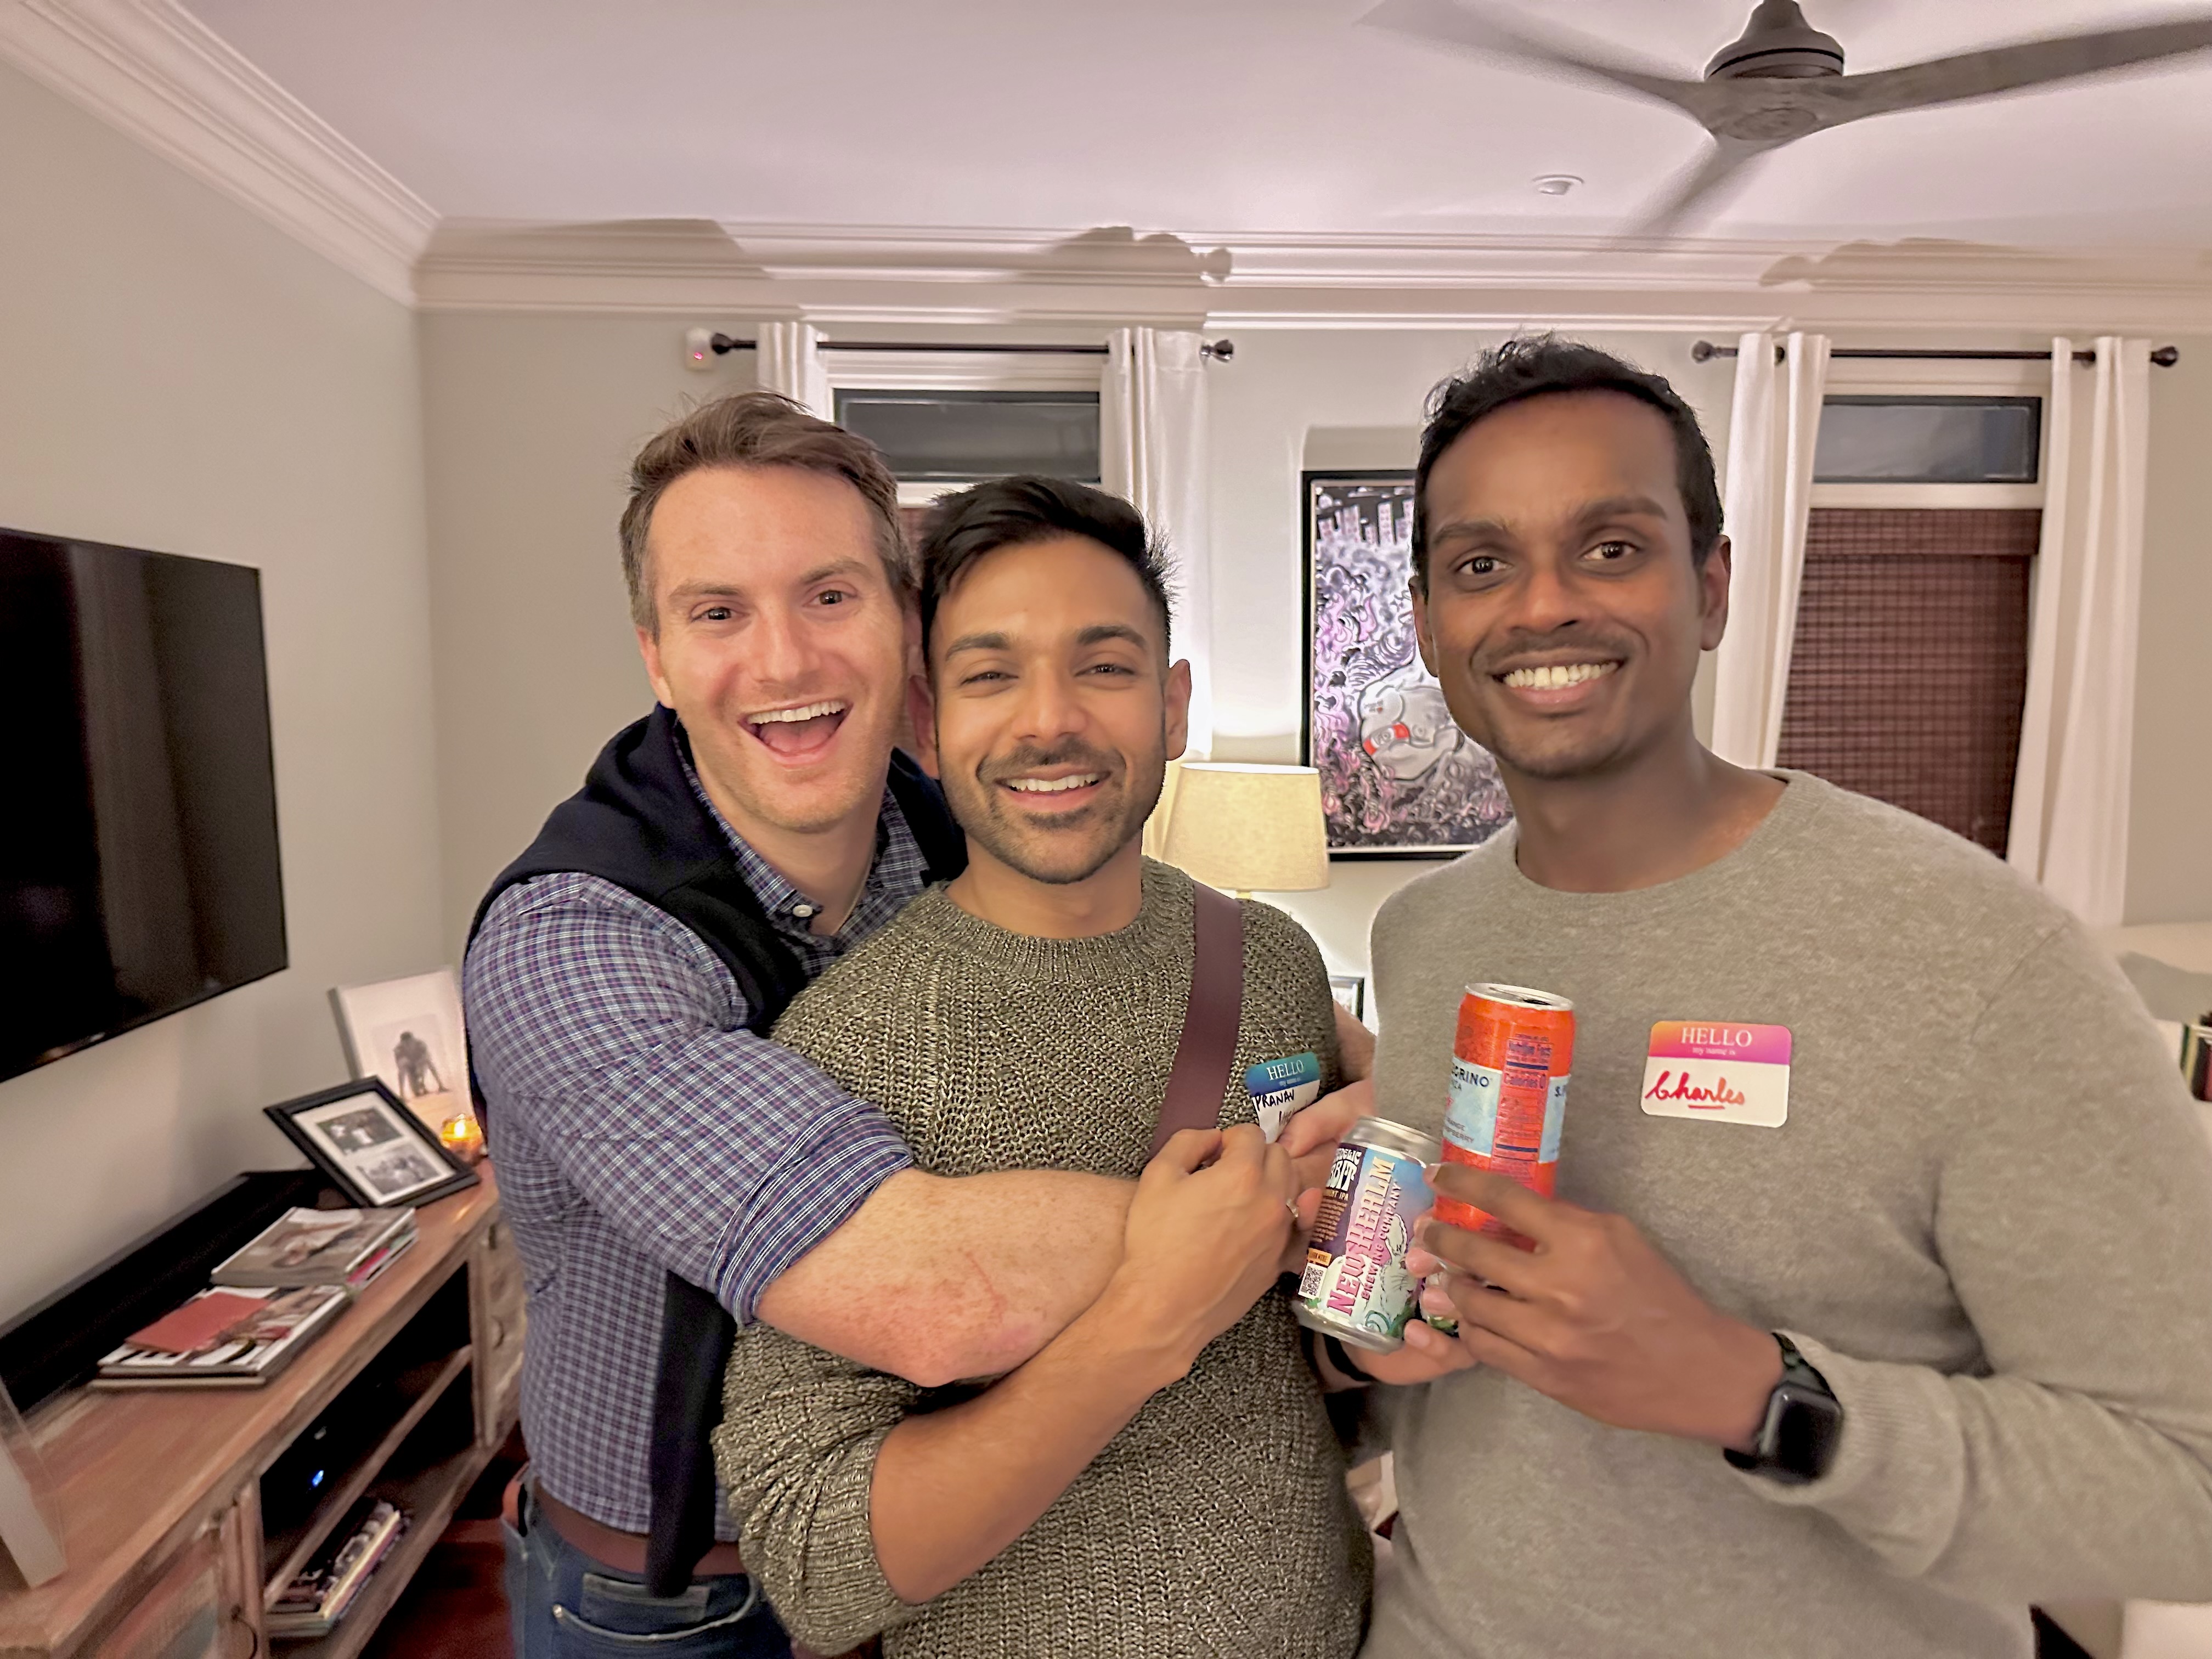 Three men smile for a photo together